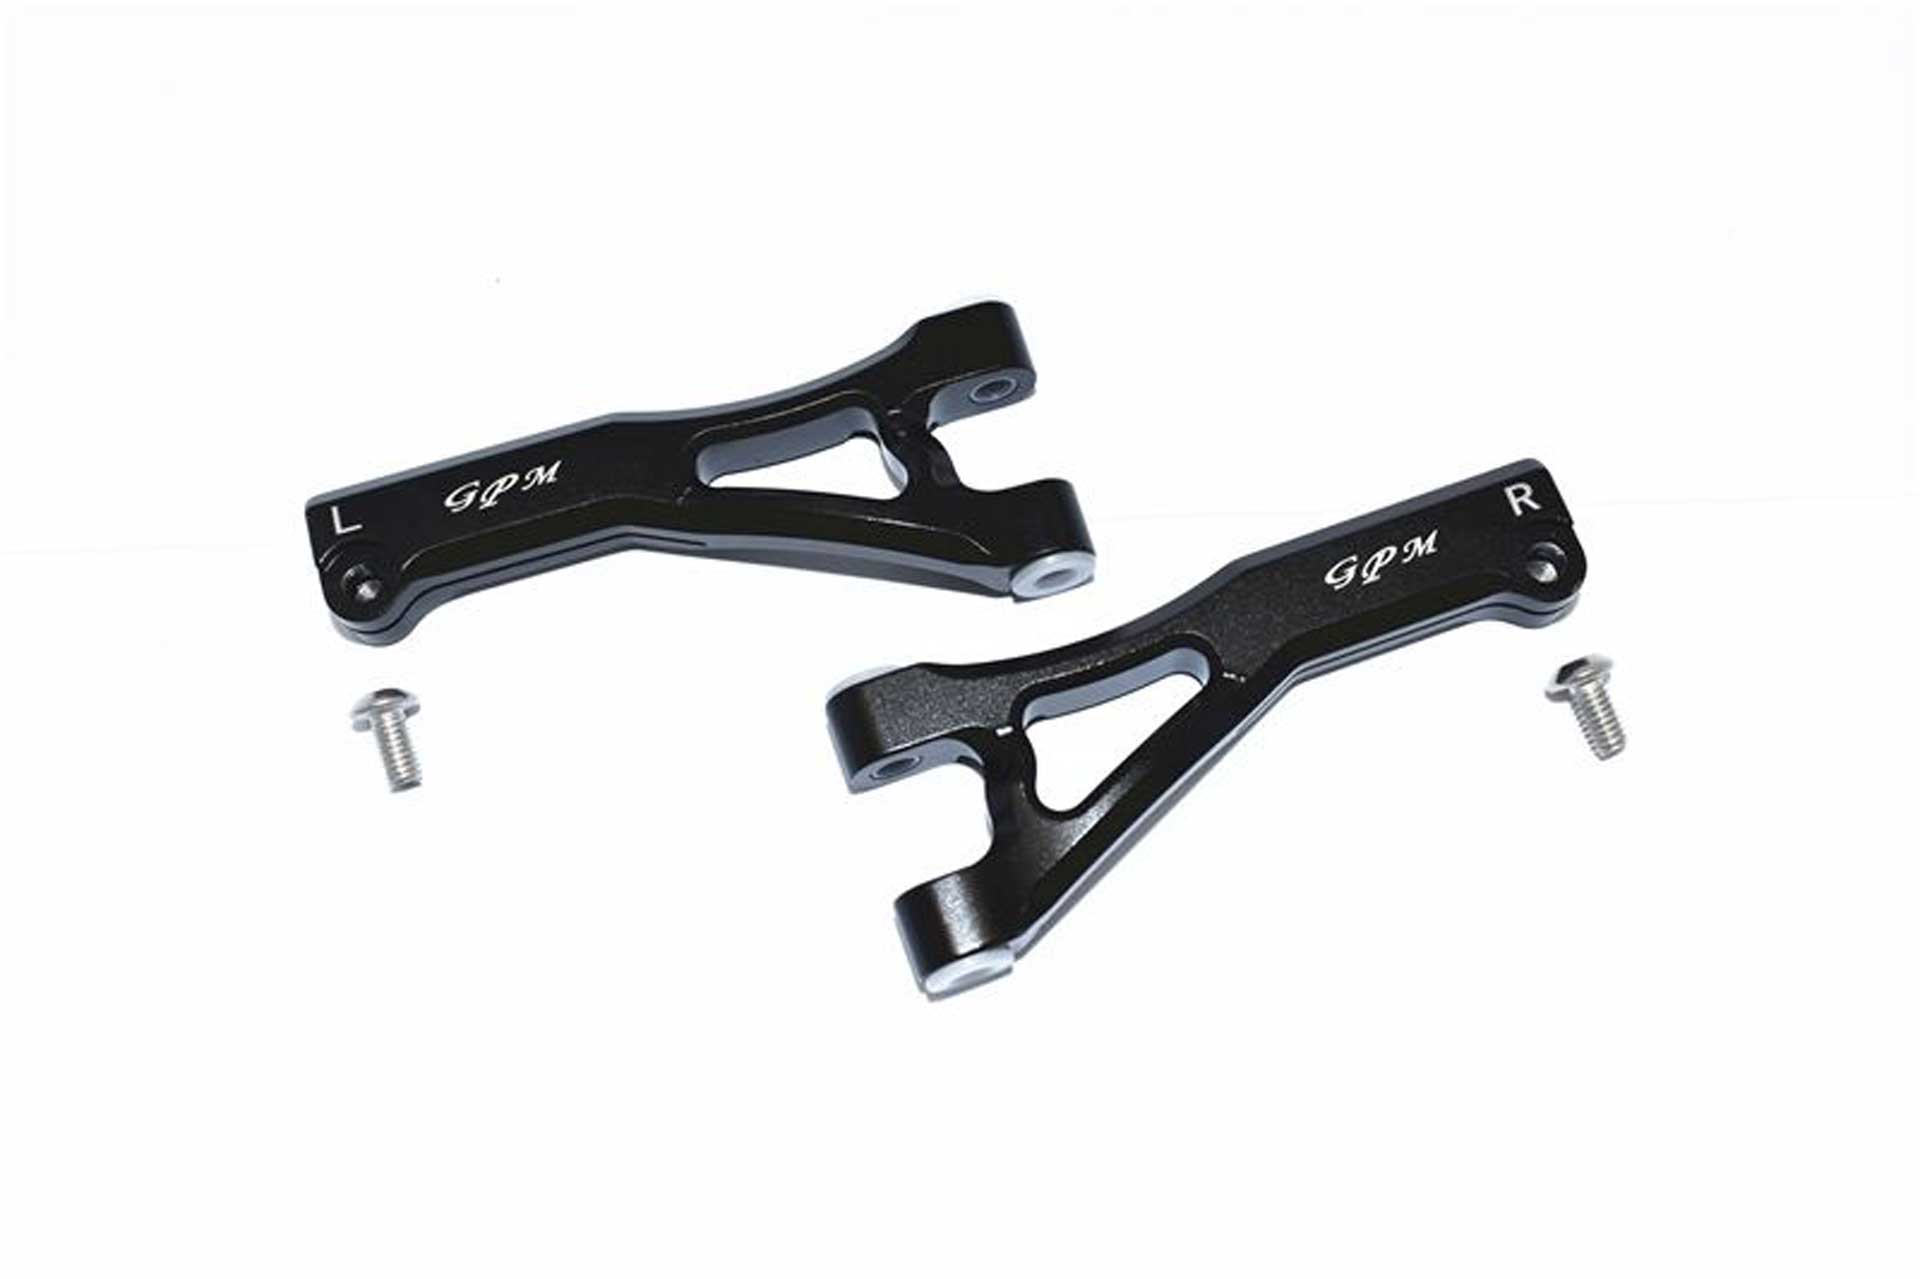 GPM ALUMINUM FRONT UPPER ARMS -4PC SET black GPM ARRMA LIMITLESS INFRACTION TYPHON